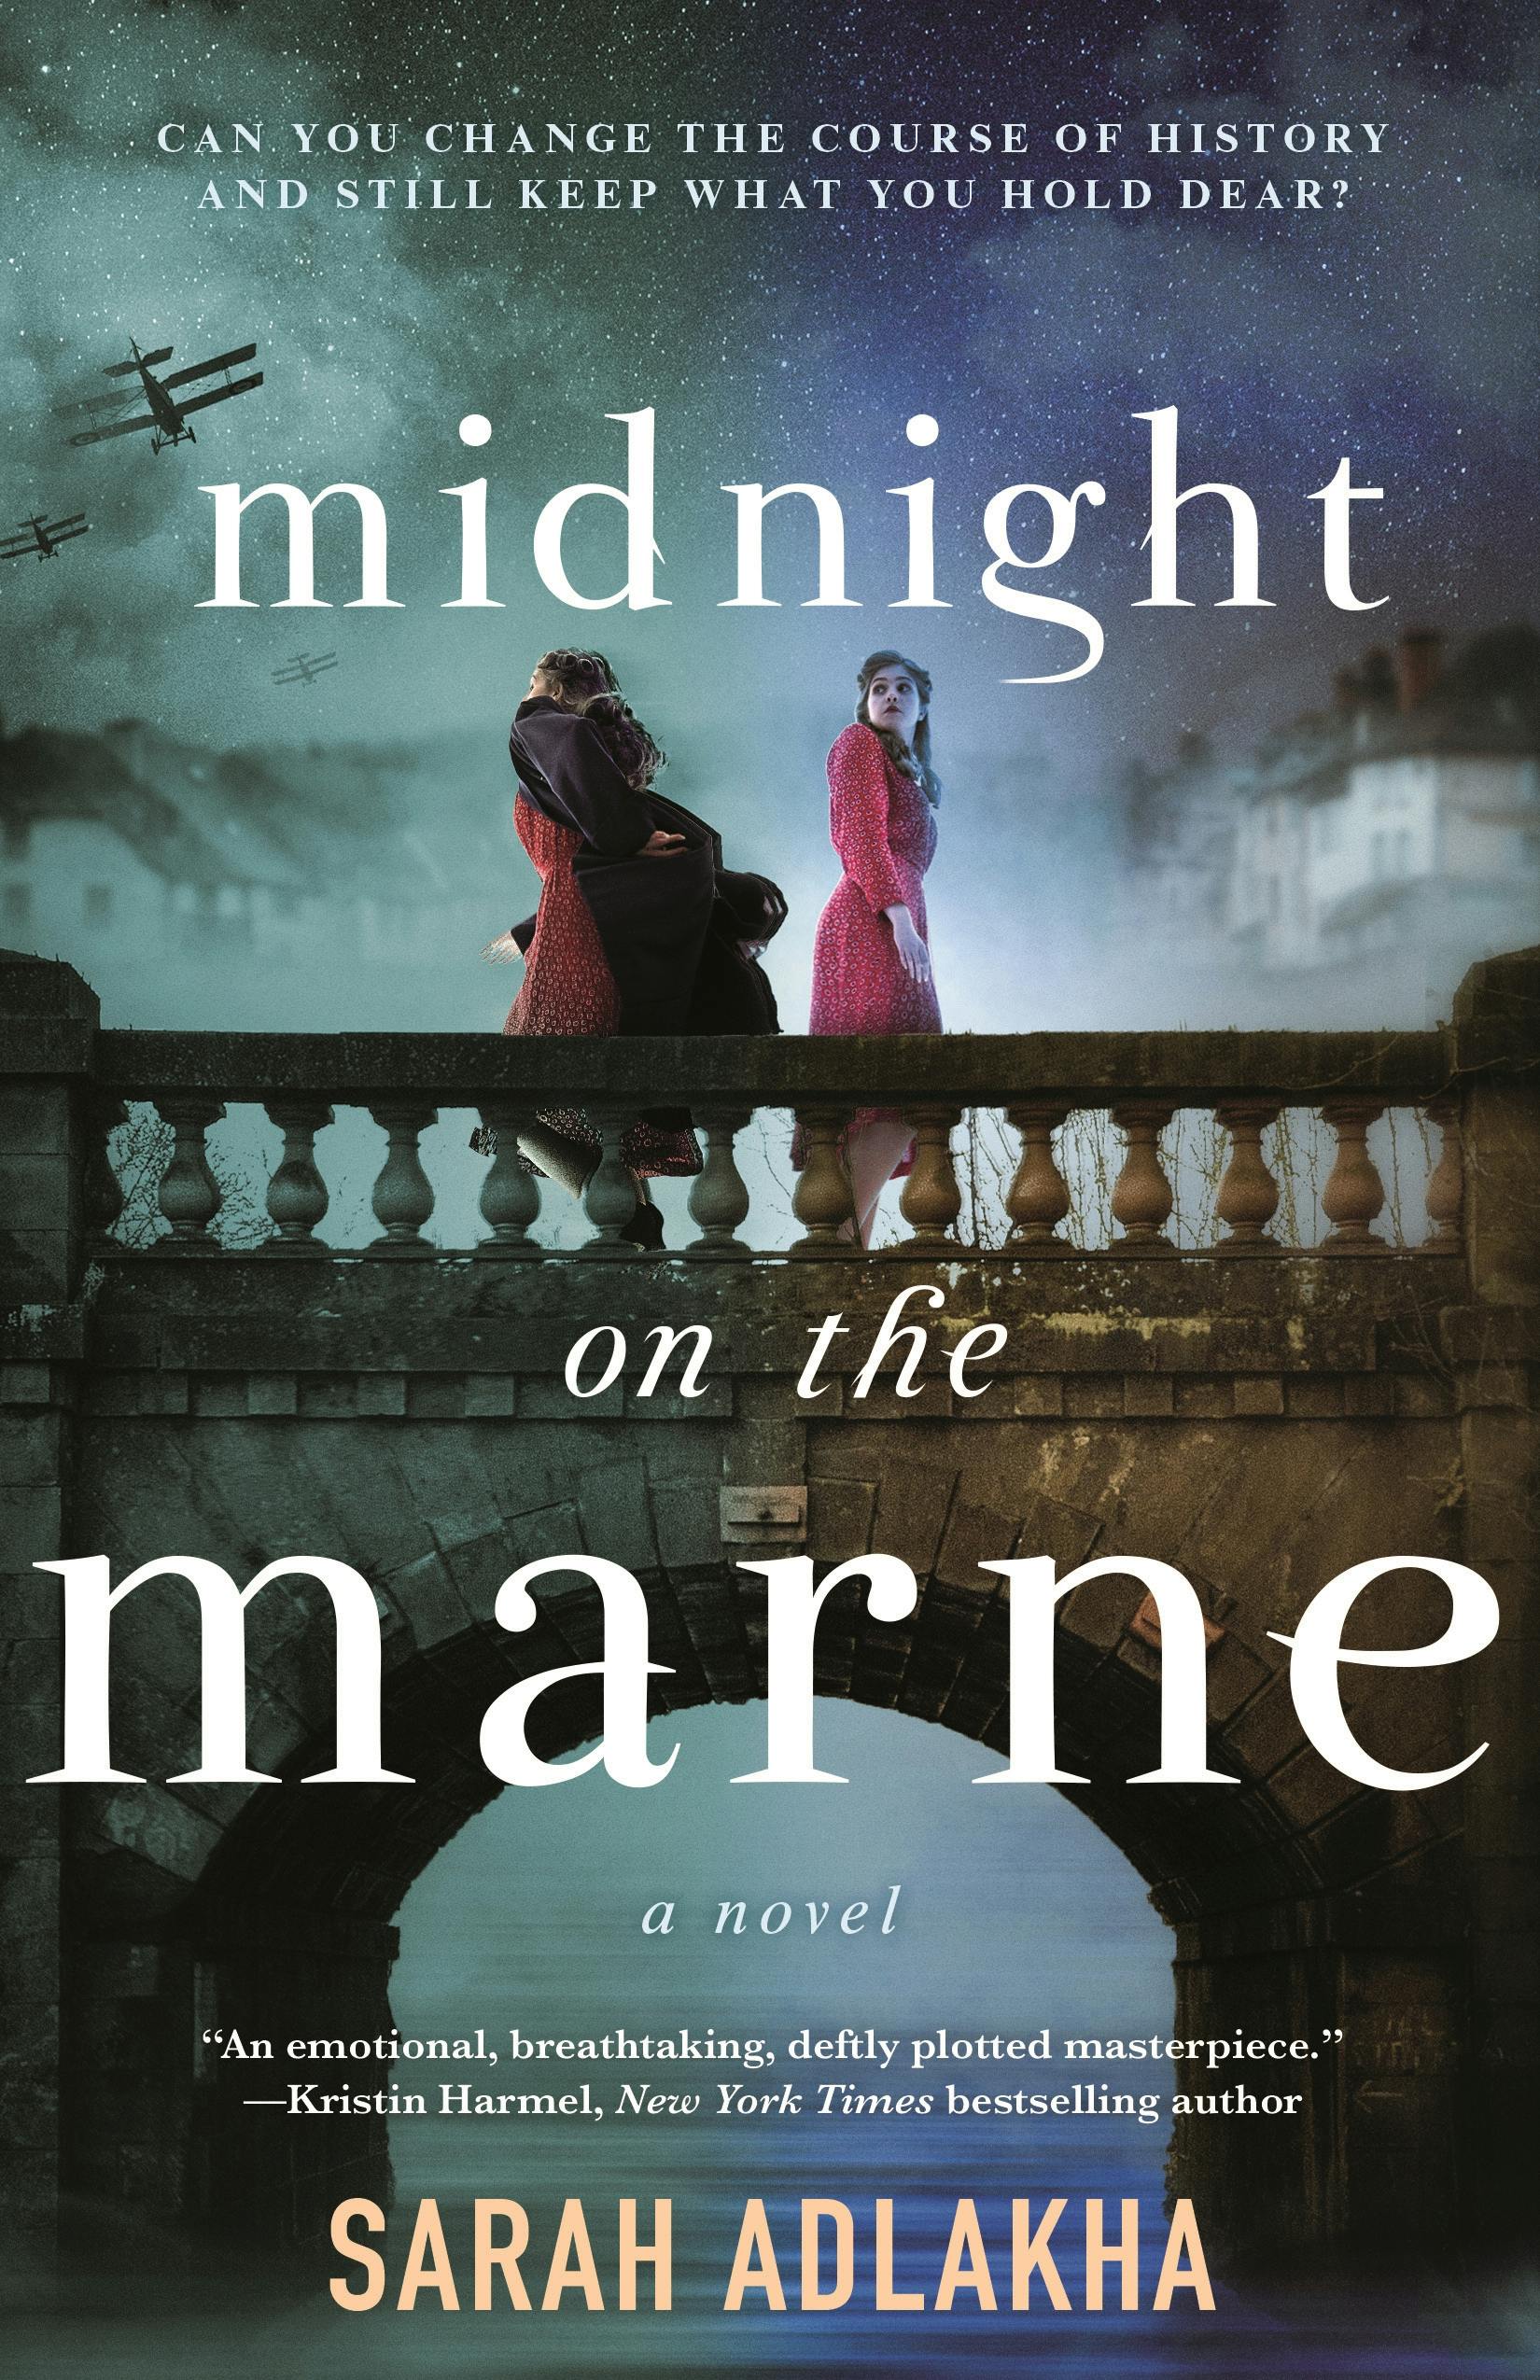 Cover for the book titled as: Midnight on the Marne